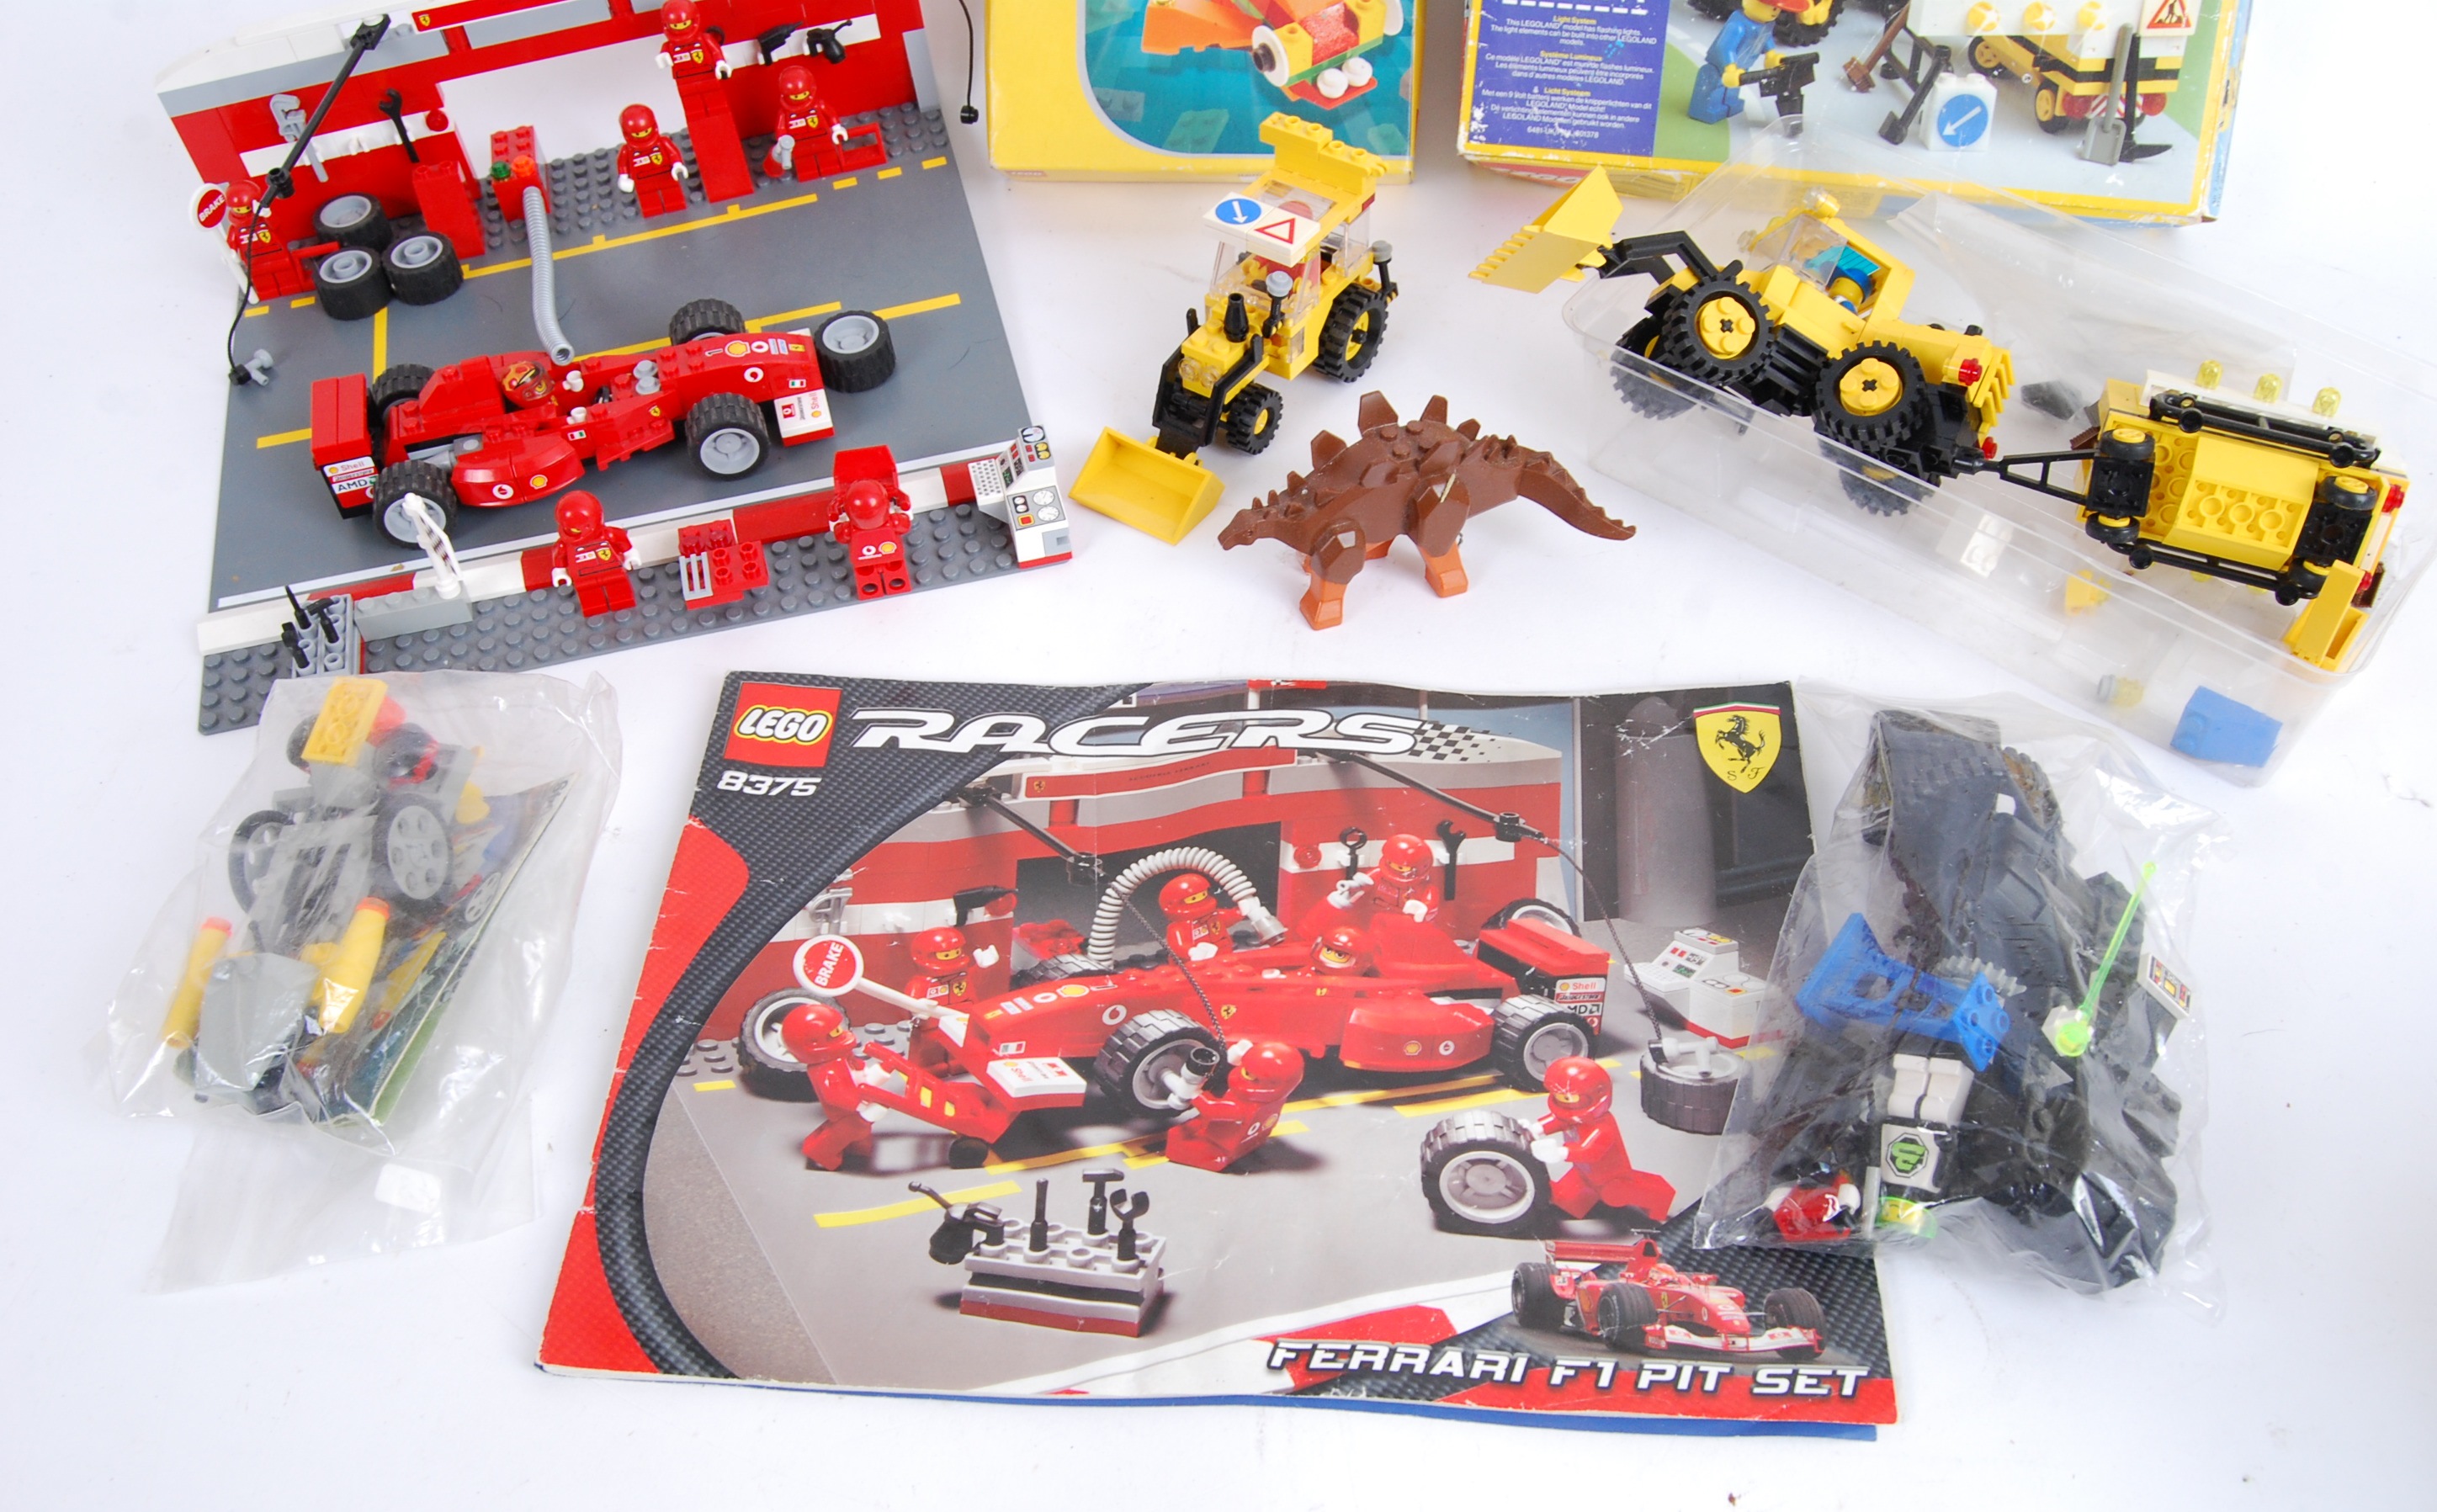 LEGO: A collection of vintage and later Lego sets - boxed and loose, - Image 4 of 4